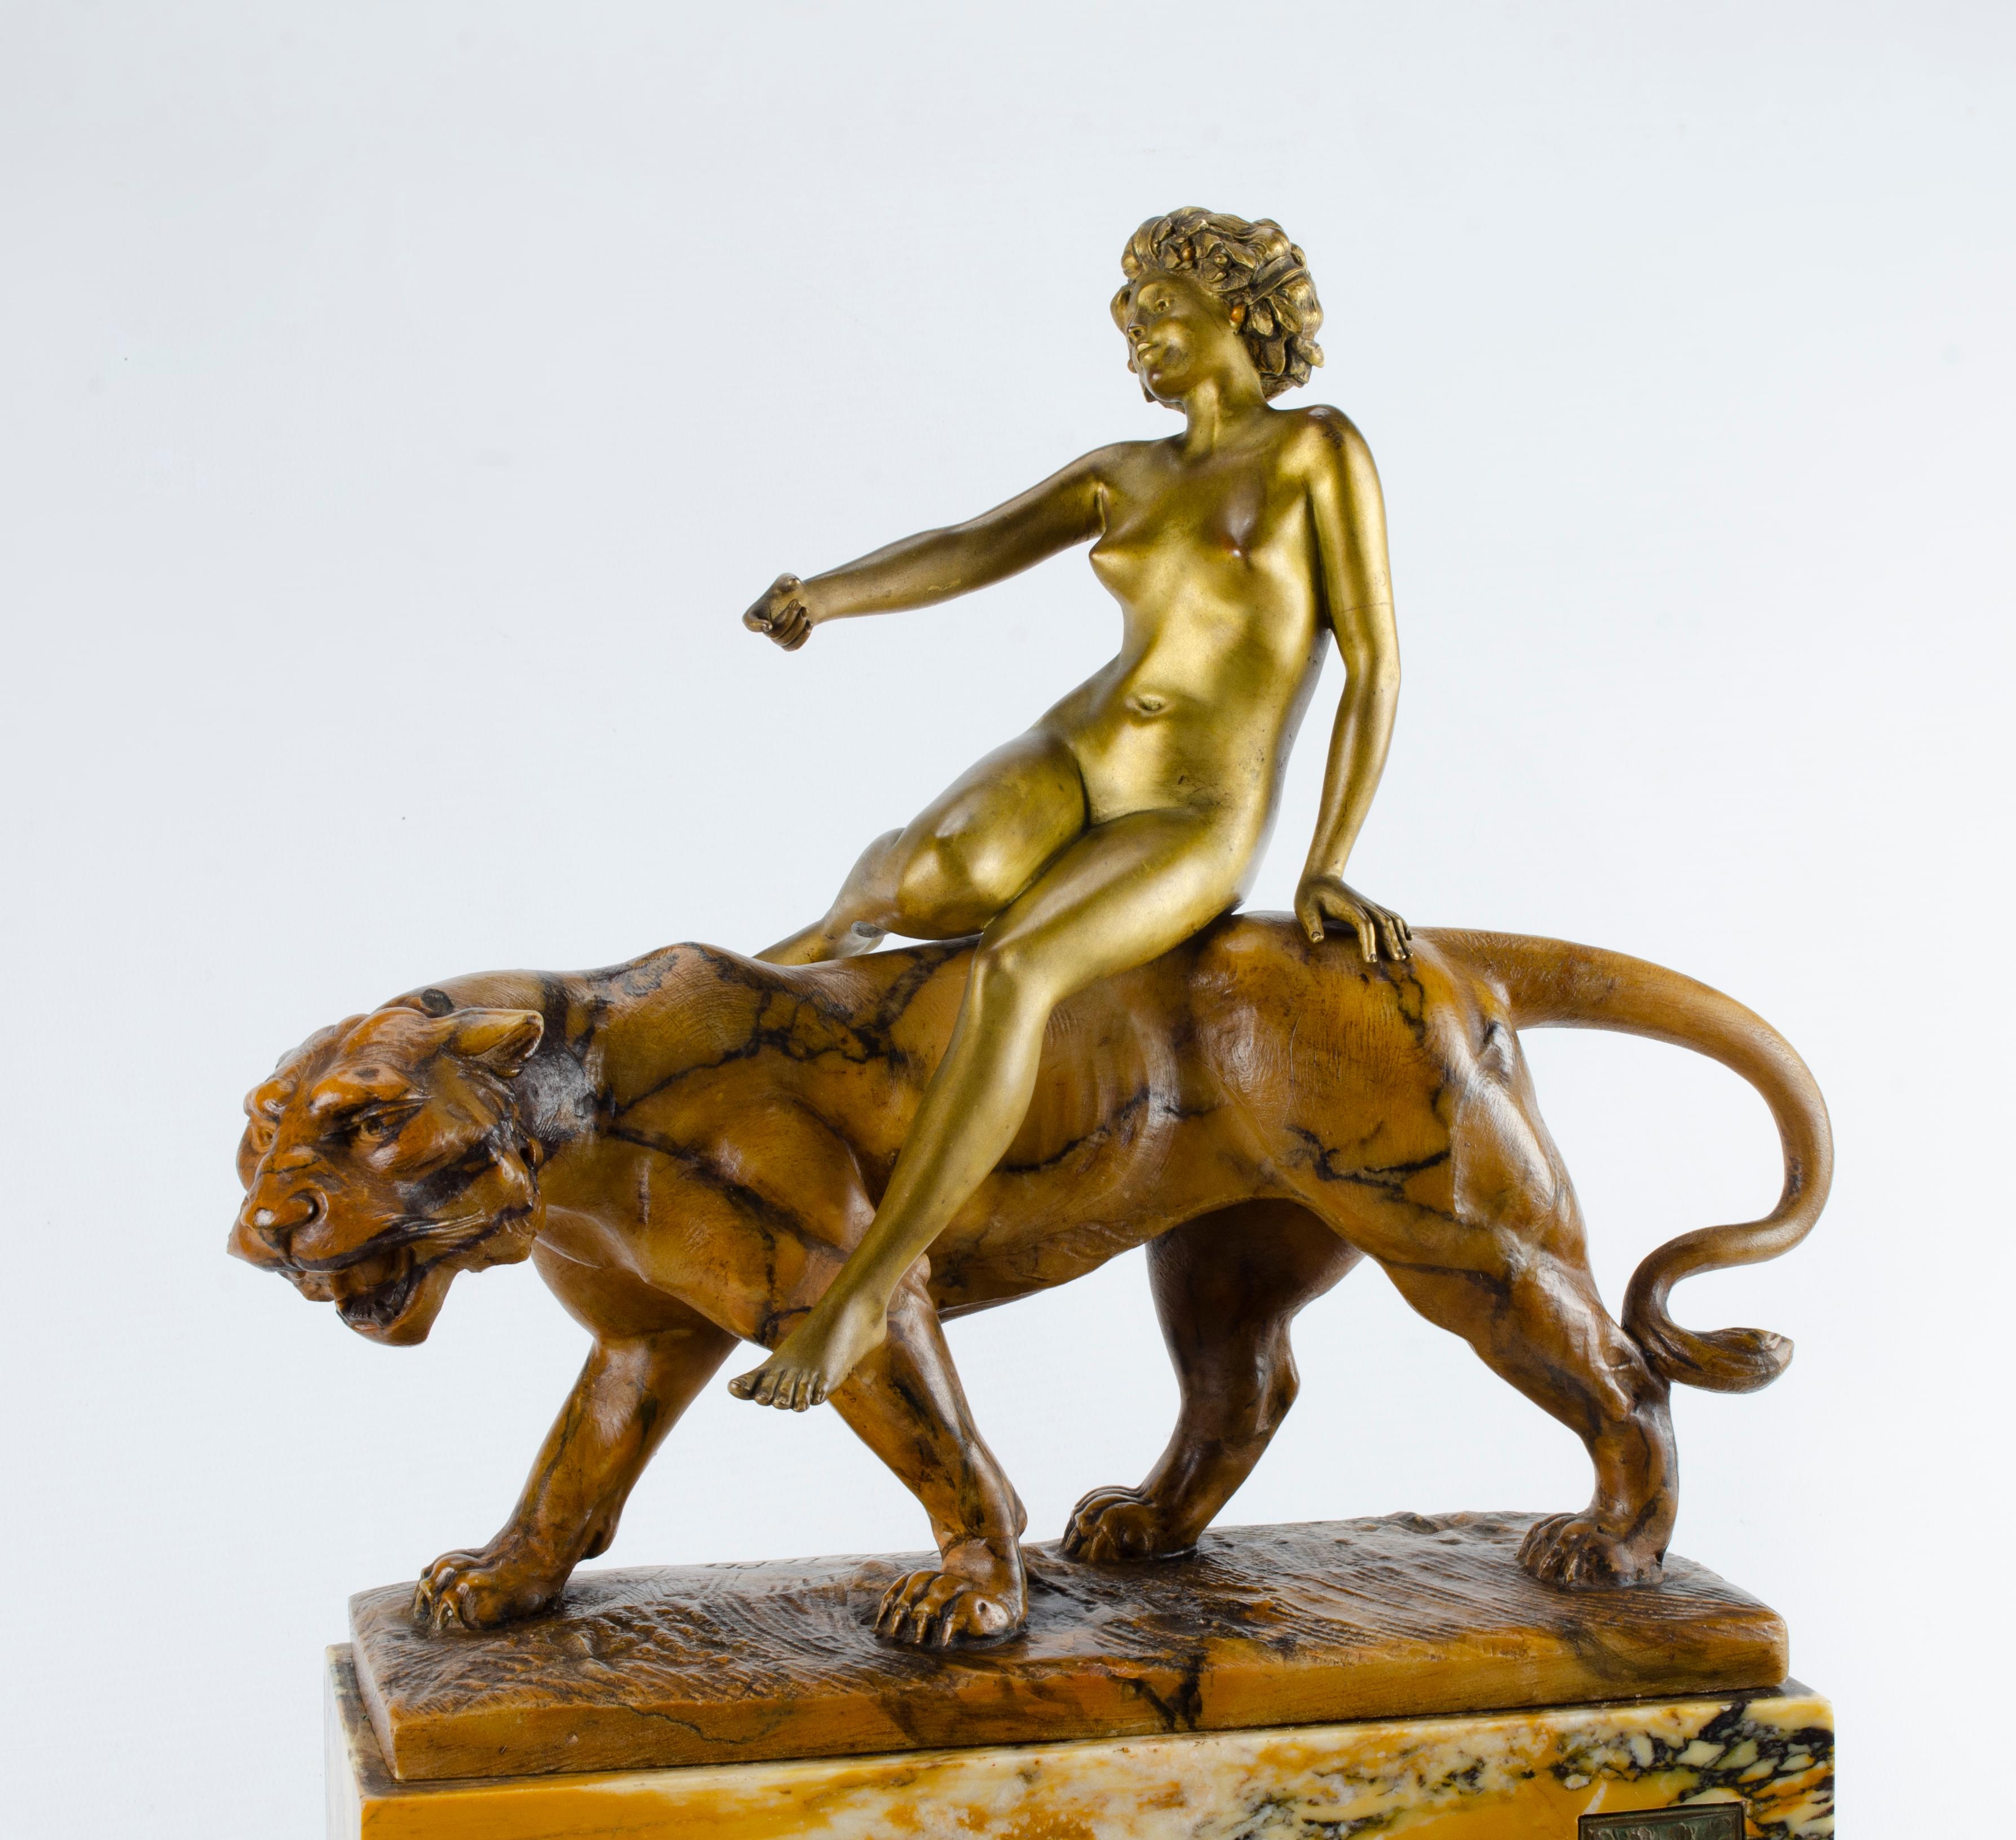 Art Deco sculpture Paul Philippe
Origin France Signed on its base
Materials Marble and bronze
Lioness and naked woman
original patina, very good condition
wear and tear.